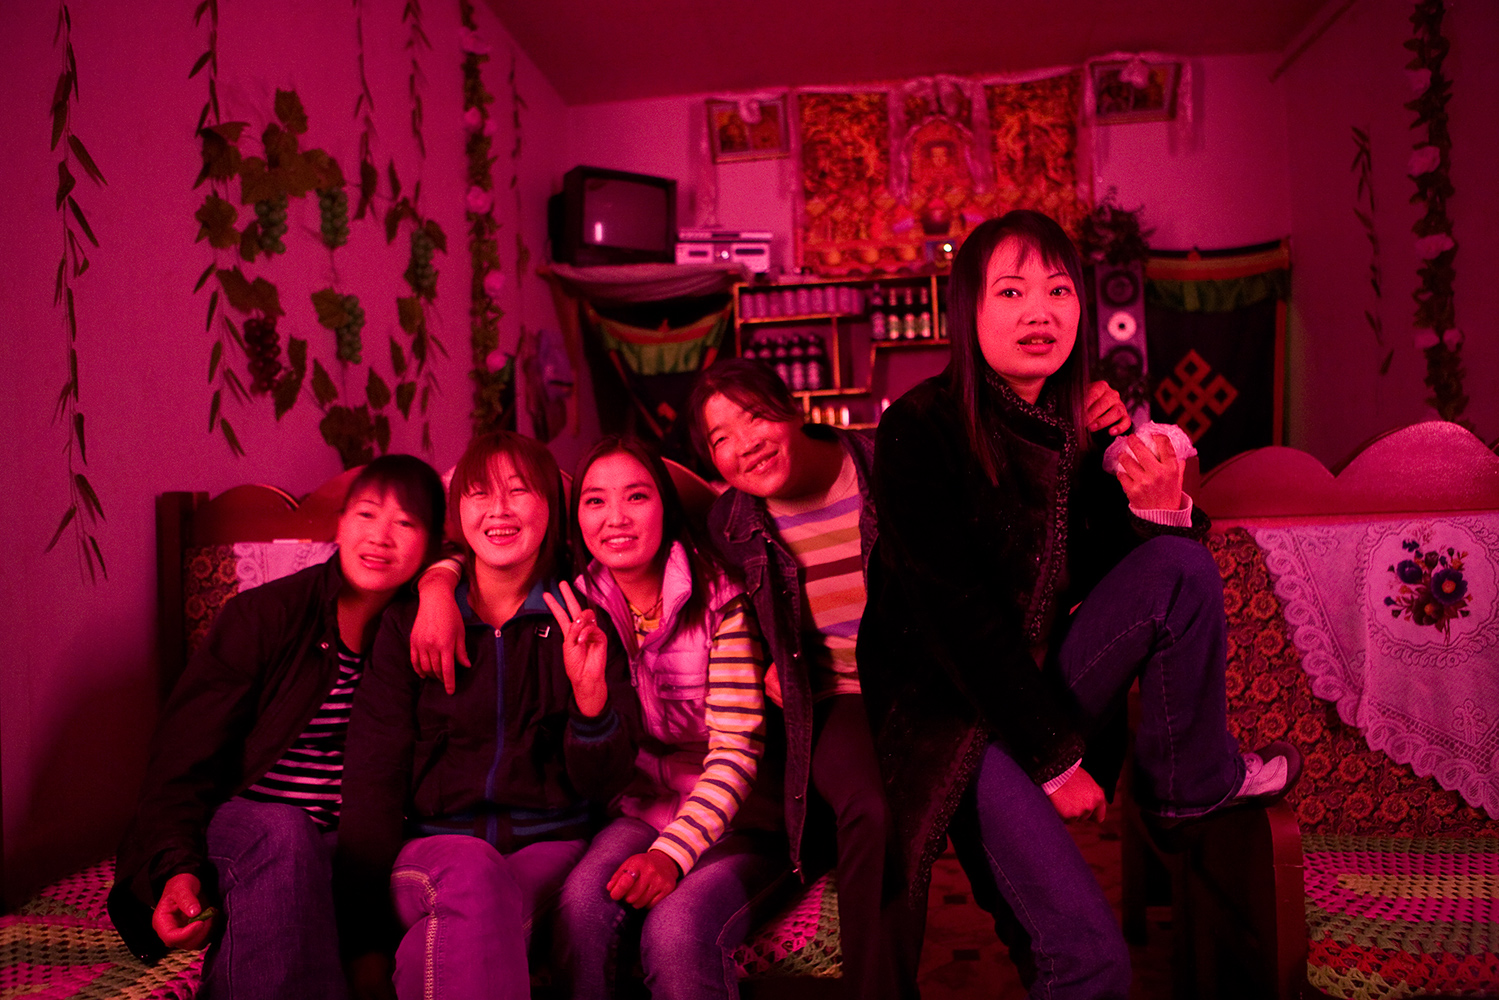  Women of the red light pose in Bayi, a Chinese town in Tibet whose name means “August 1,” or the day the People's Liberation Army was founded. The Chinese government forbade foreigners from visiting the town for many years, but now it is open for tr